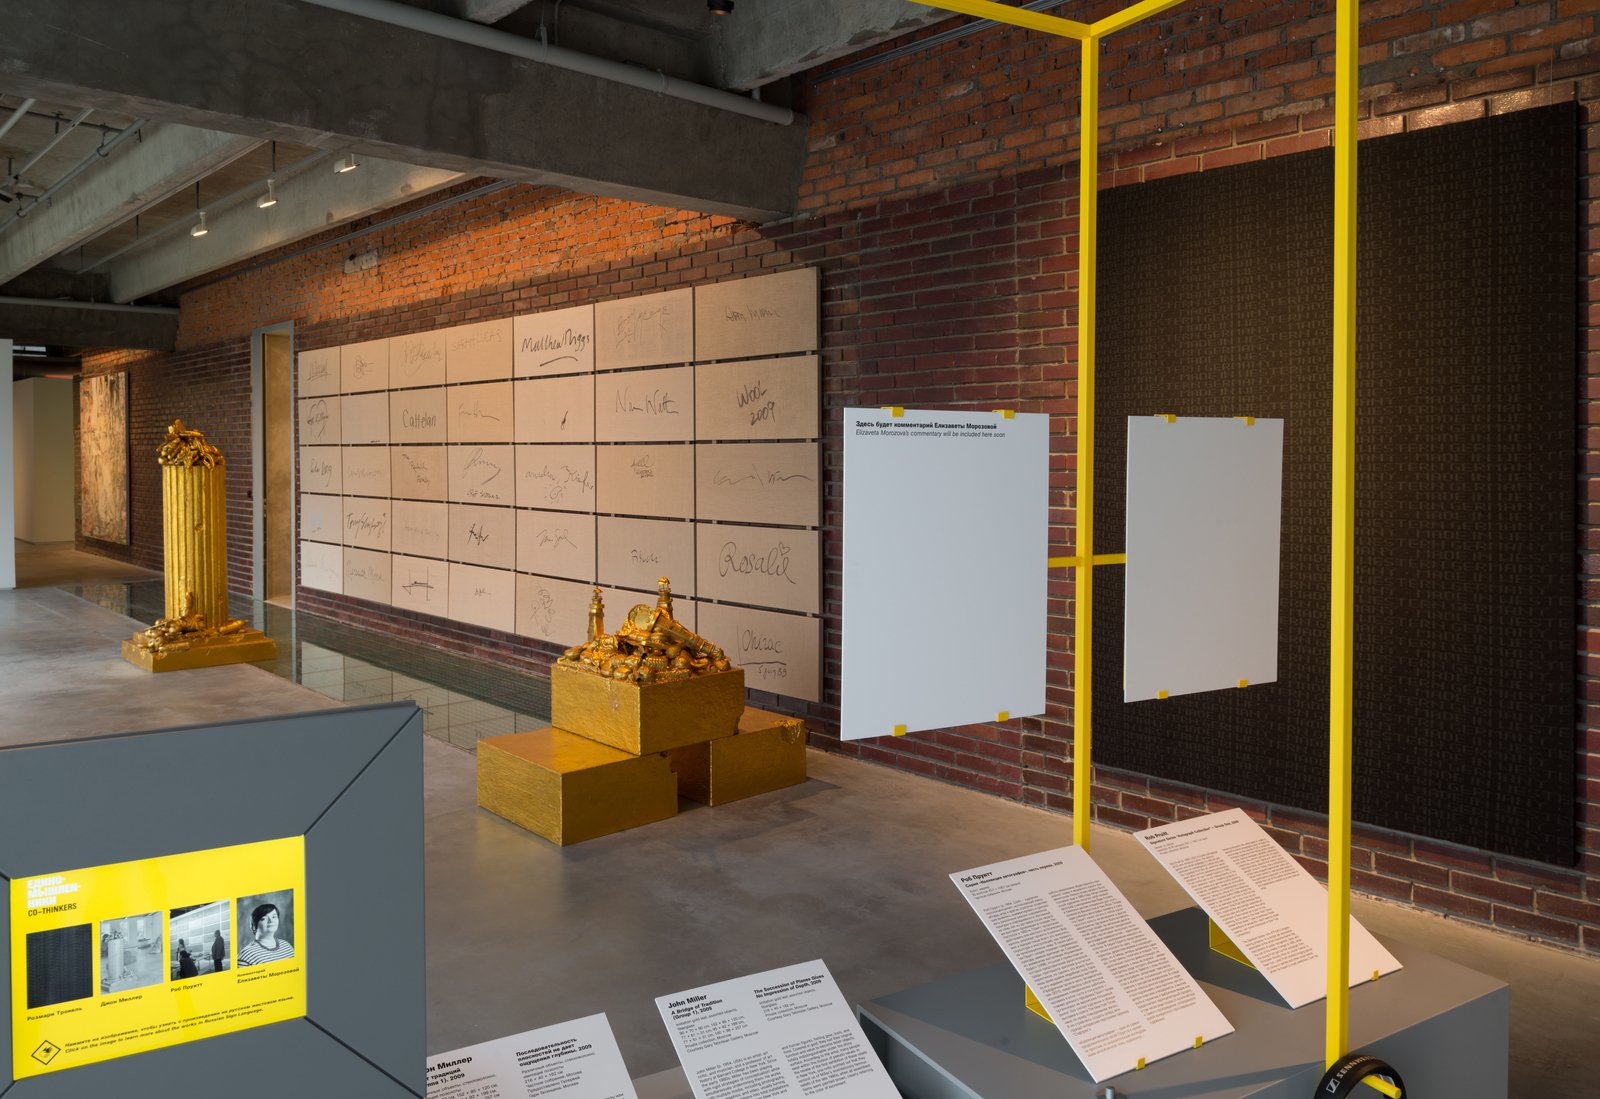 Installation view of Co&ndash;thinkers, Garage Museum of Contemporary Art, Moscow, 2016 Courtesy Garage Museum of Contemporary ArtPhoto: Yuri Palmin